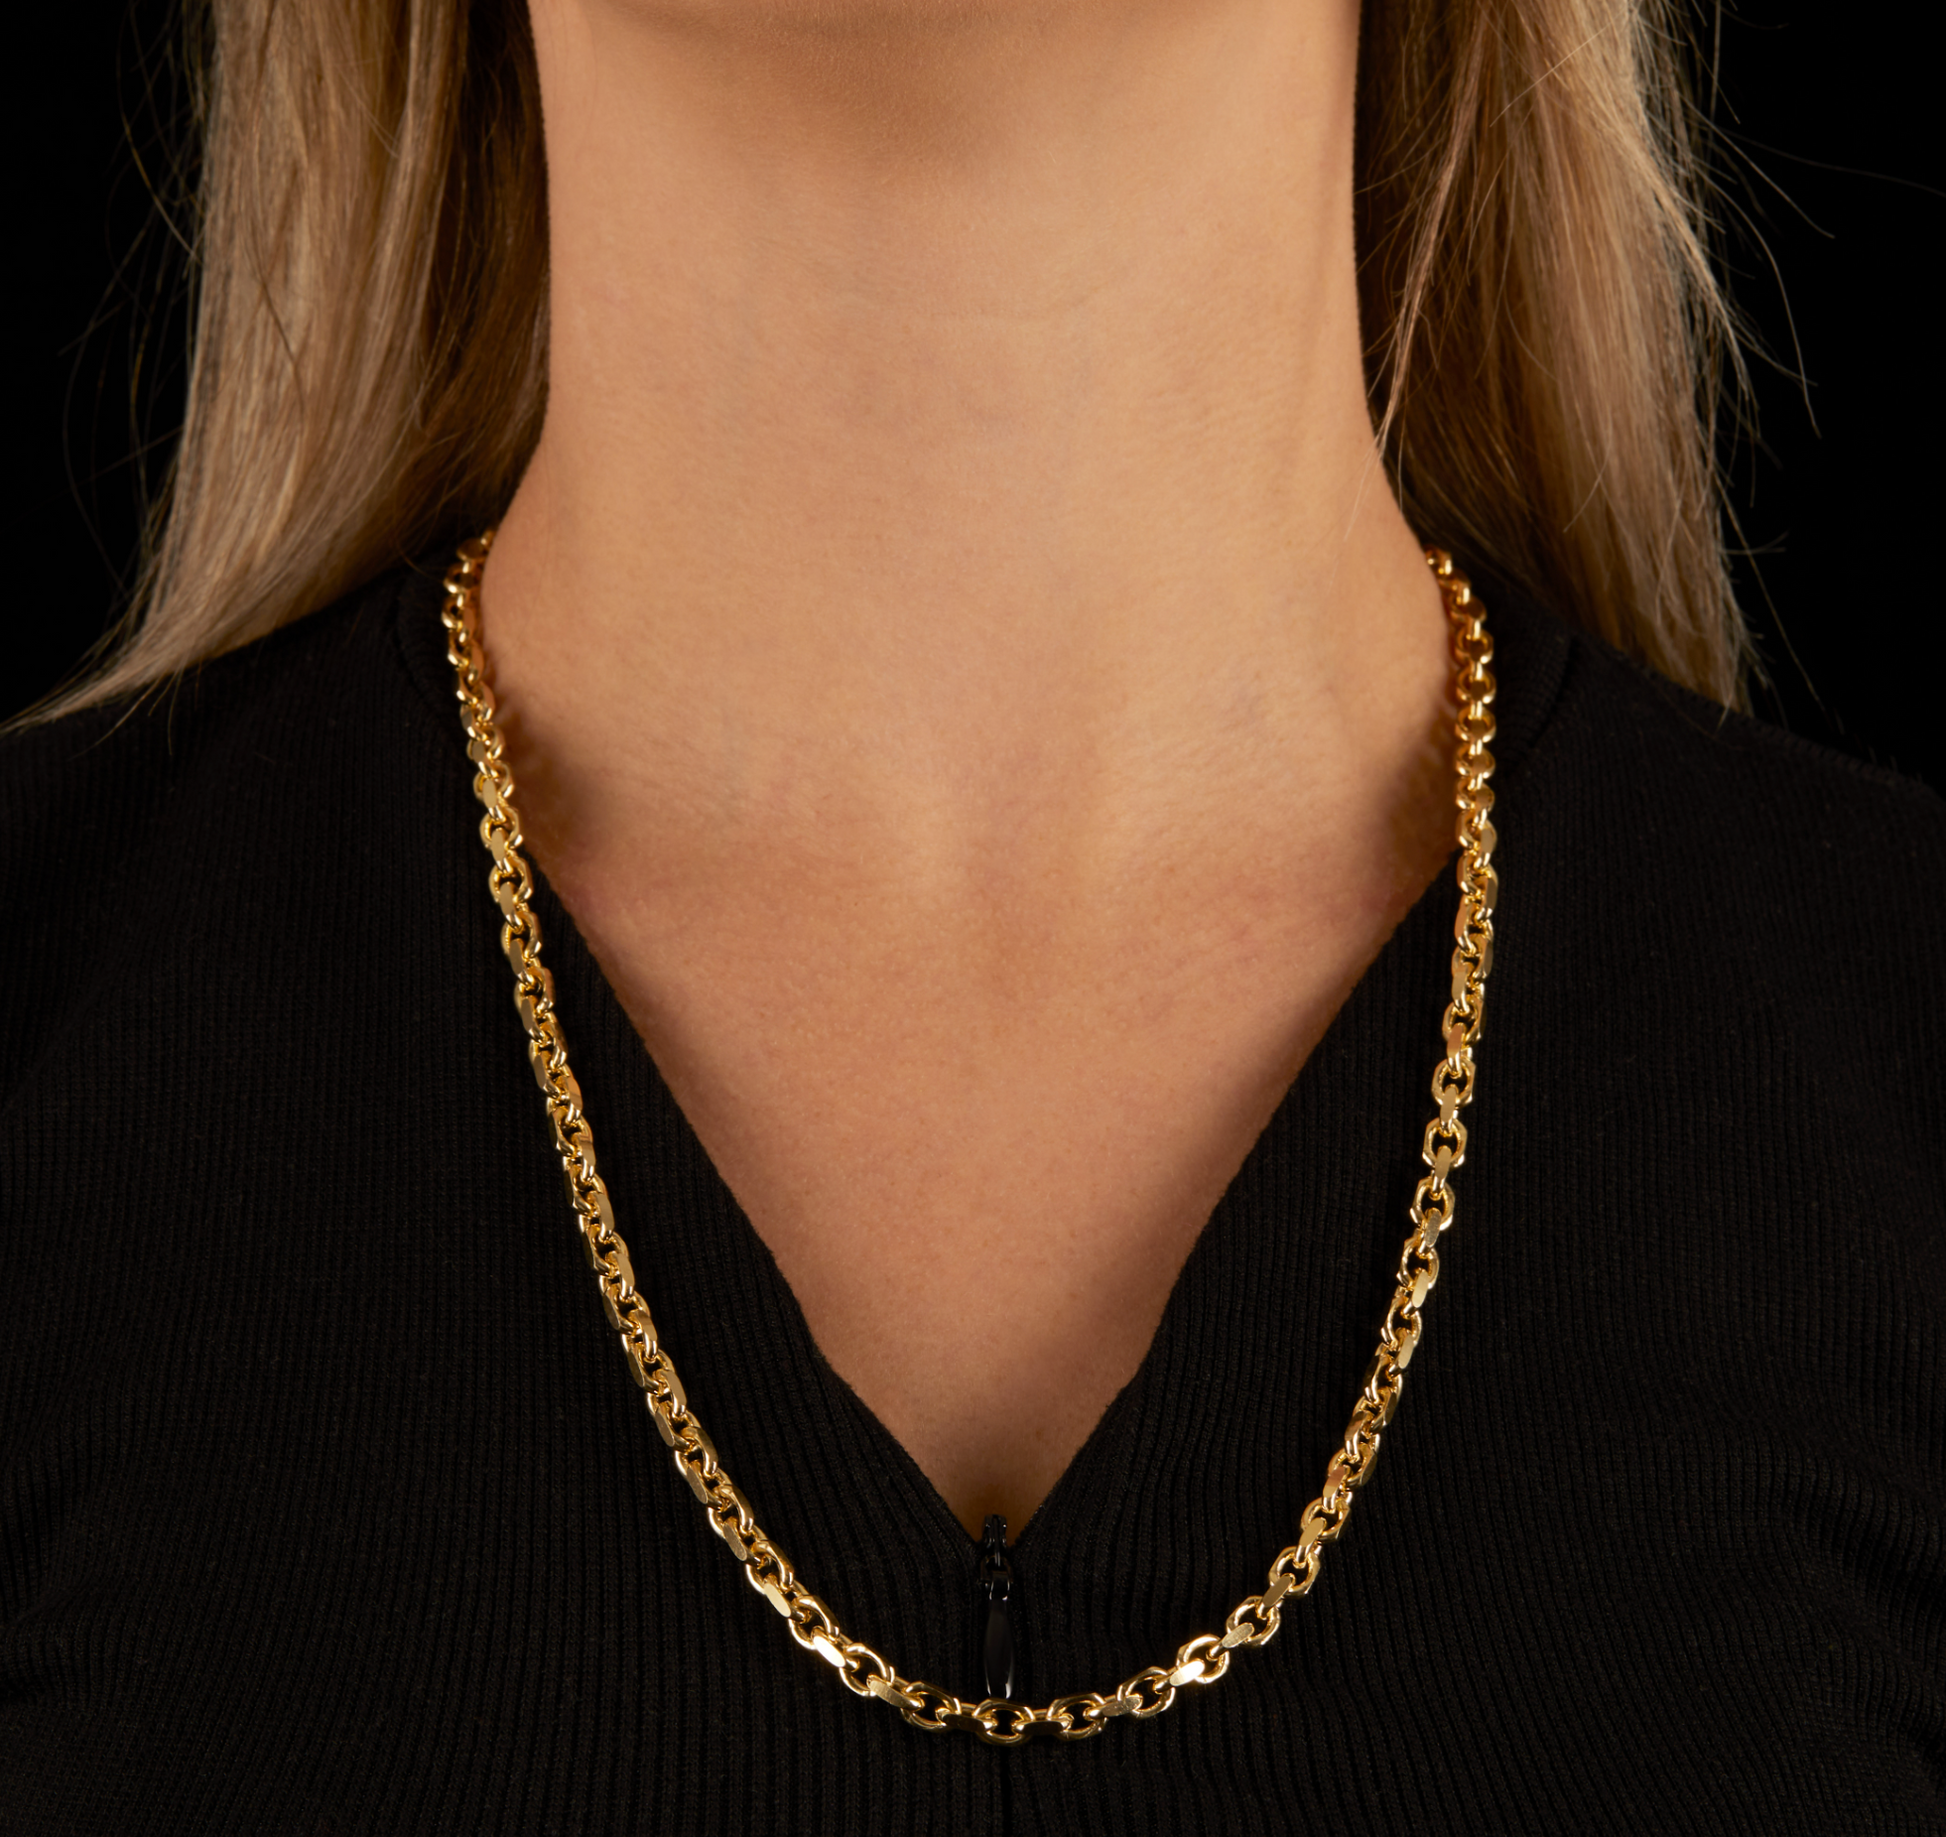 14K Yellow Gold Solid Rope Chain 10MM, GA